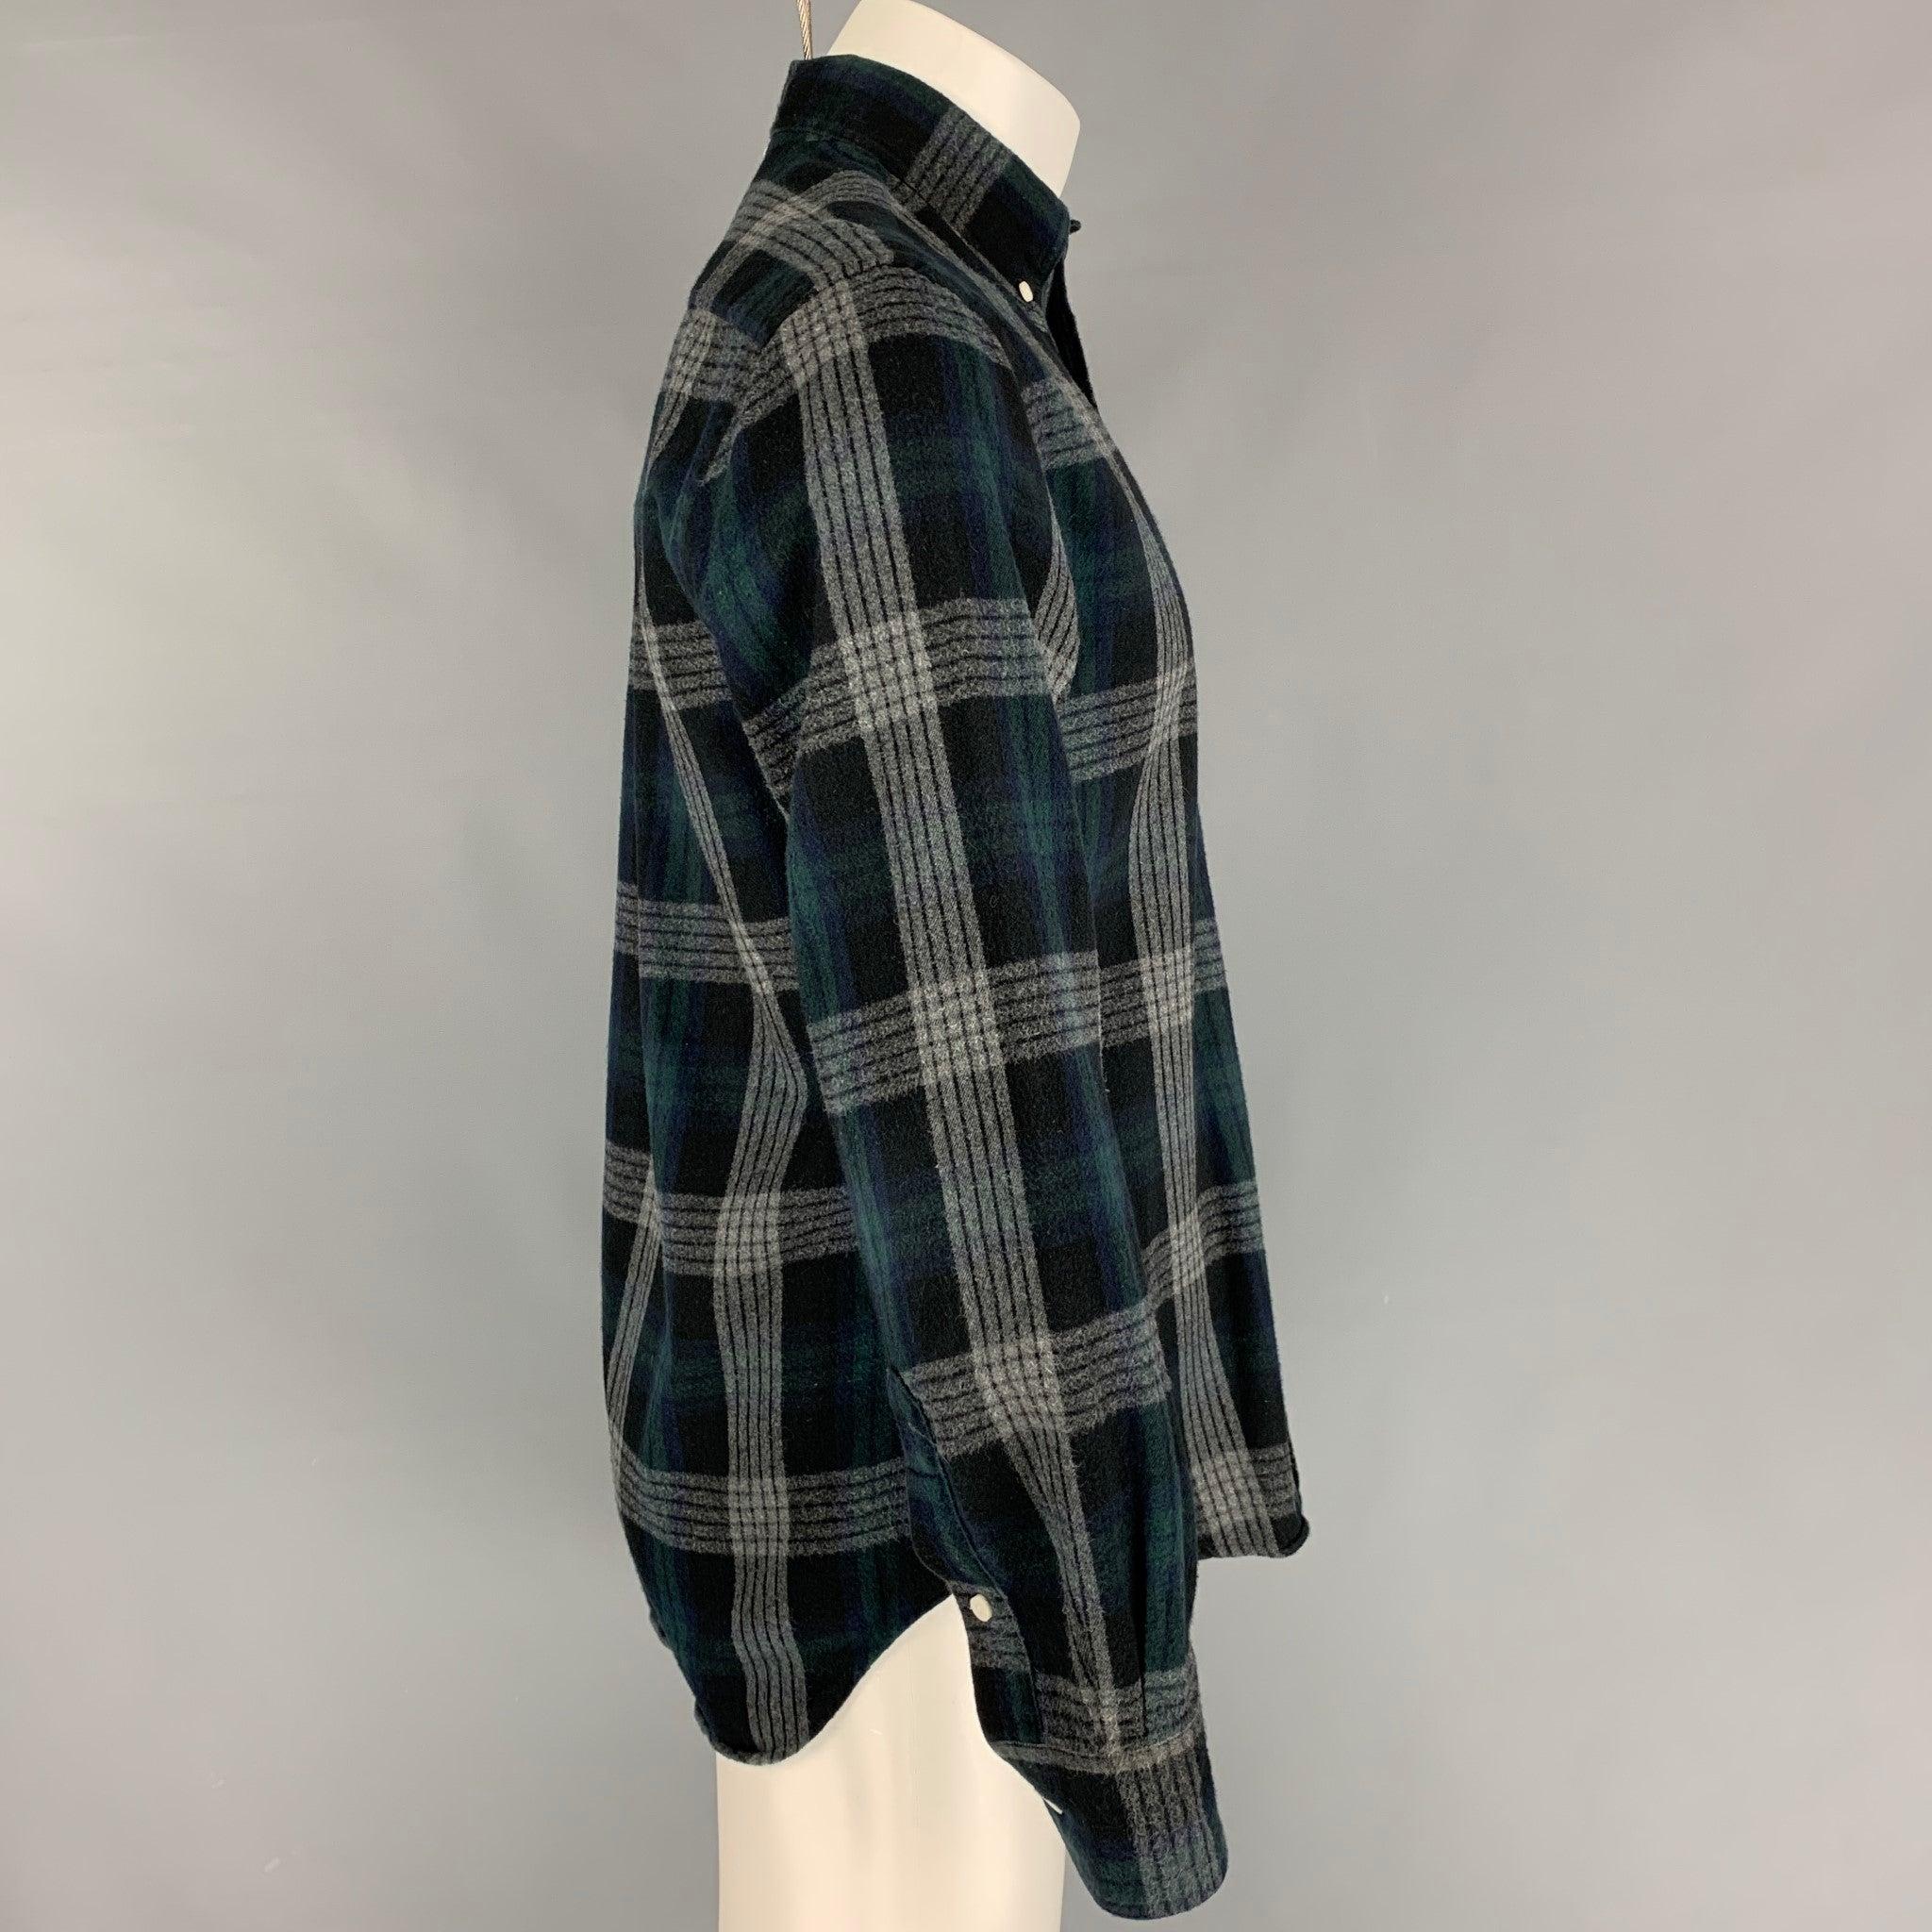 GITMAN BROS long sleeve shirt comes in a grey & green plaid cotton featuring a button down collar, patch pocket, and a buttoned closure. Made in USA.
Very Good
Pre-Owned Condition. 

Marked:   M 

Measurements: 
 
Shoulder: 17.5 inches  Chest: 40